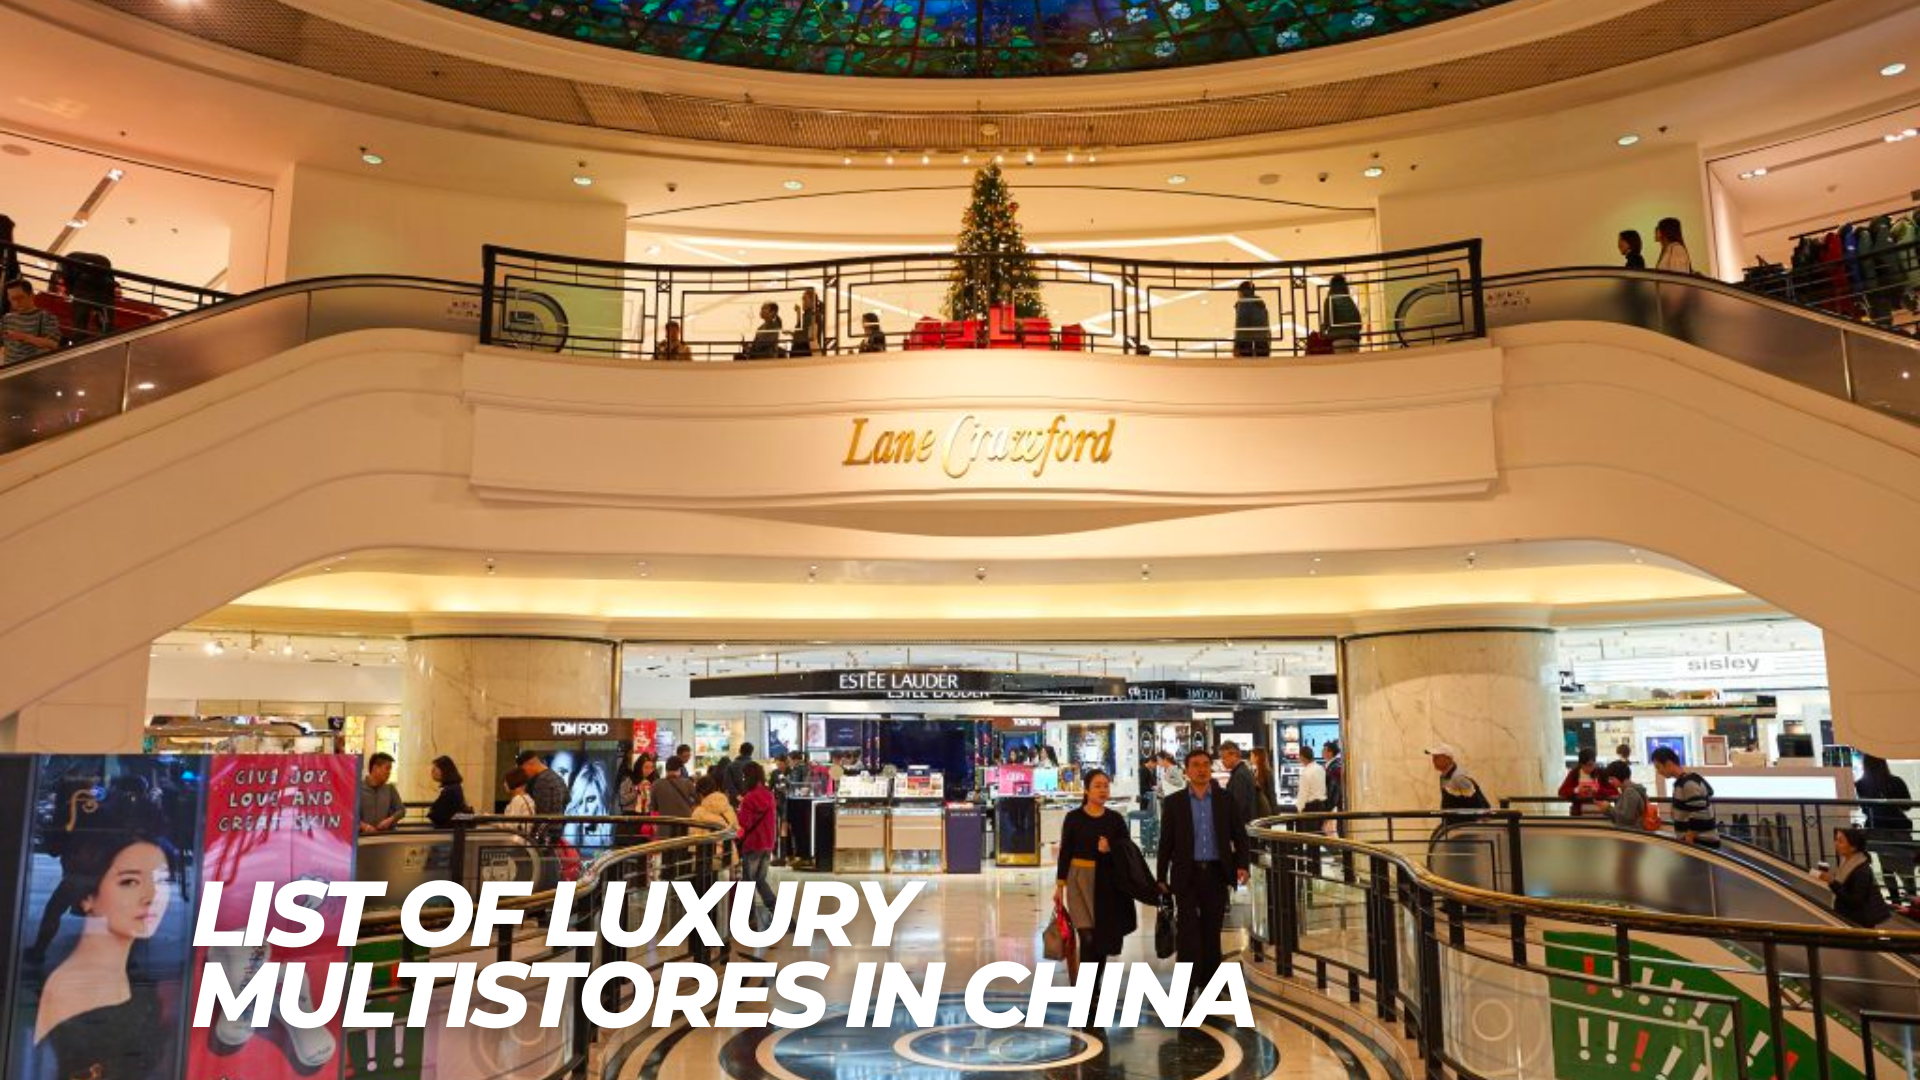 Estee Lauder Leads in China through Flagship Store